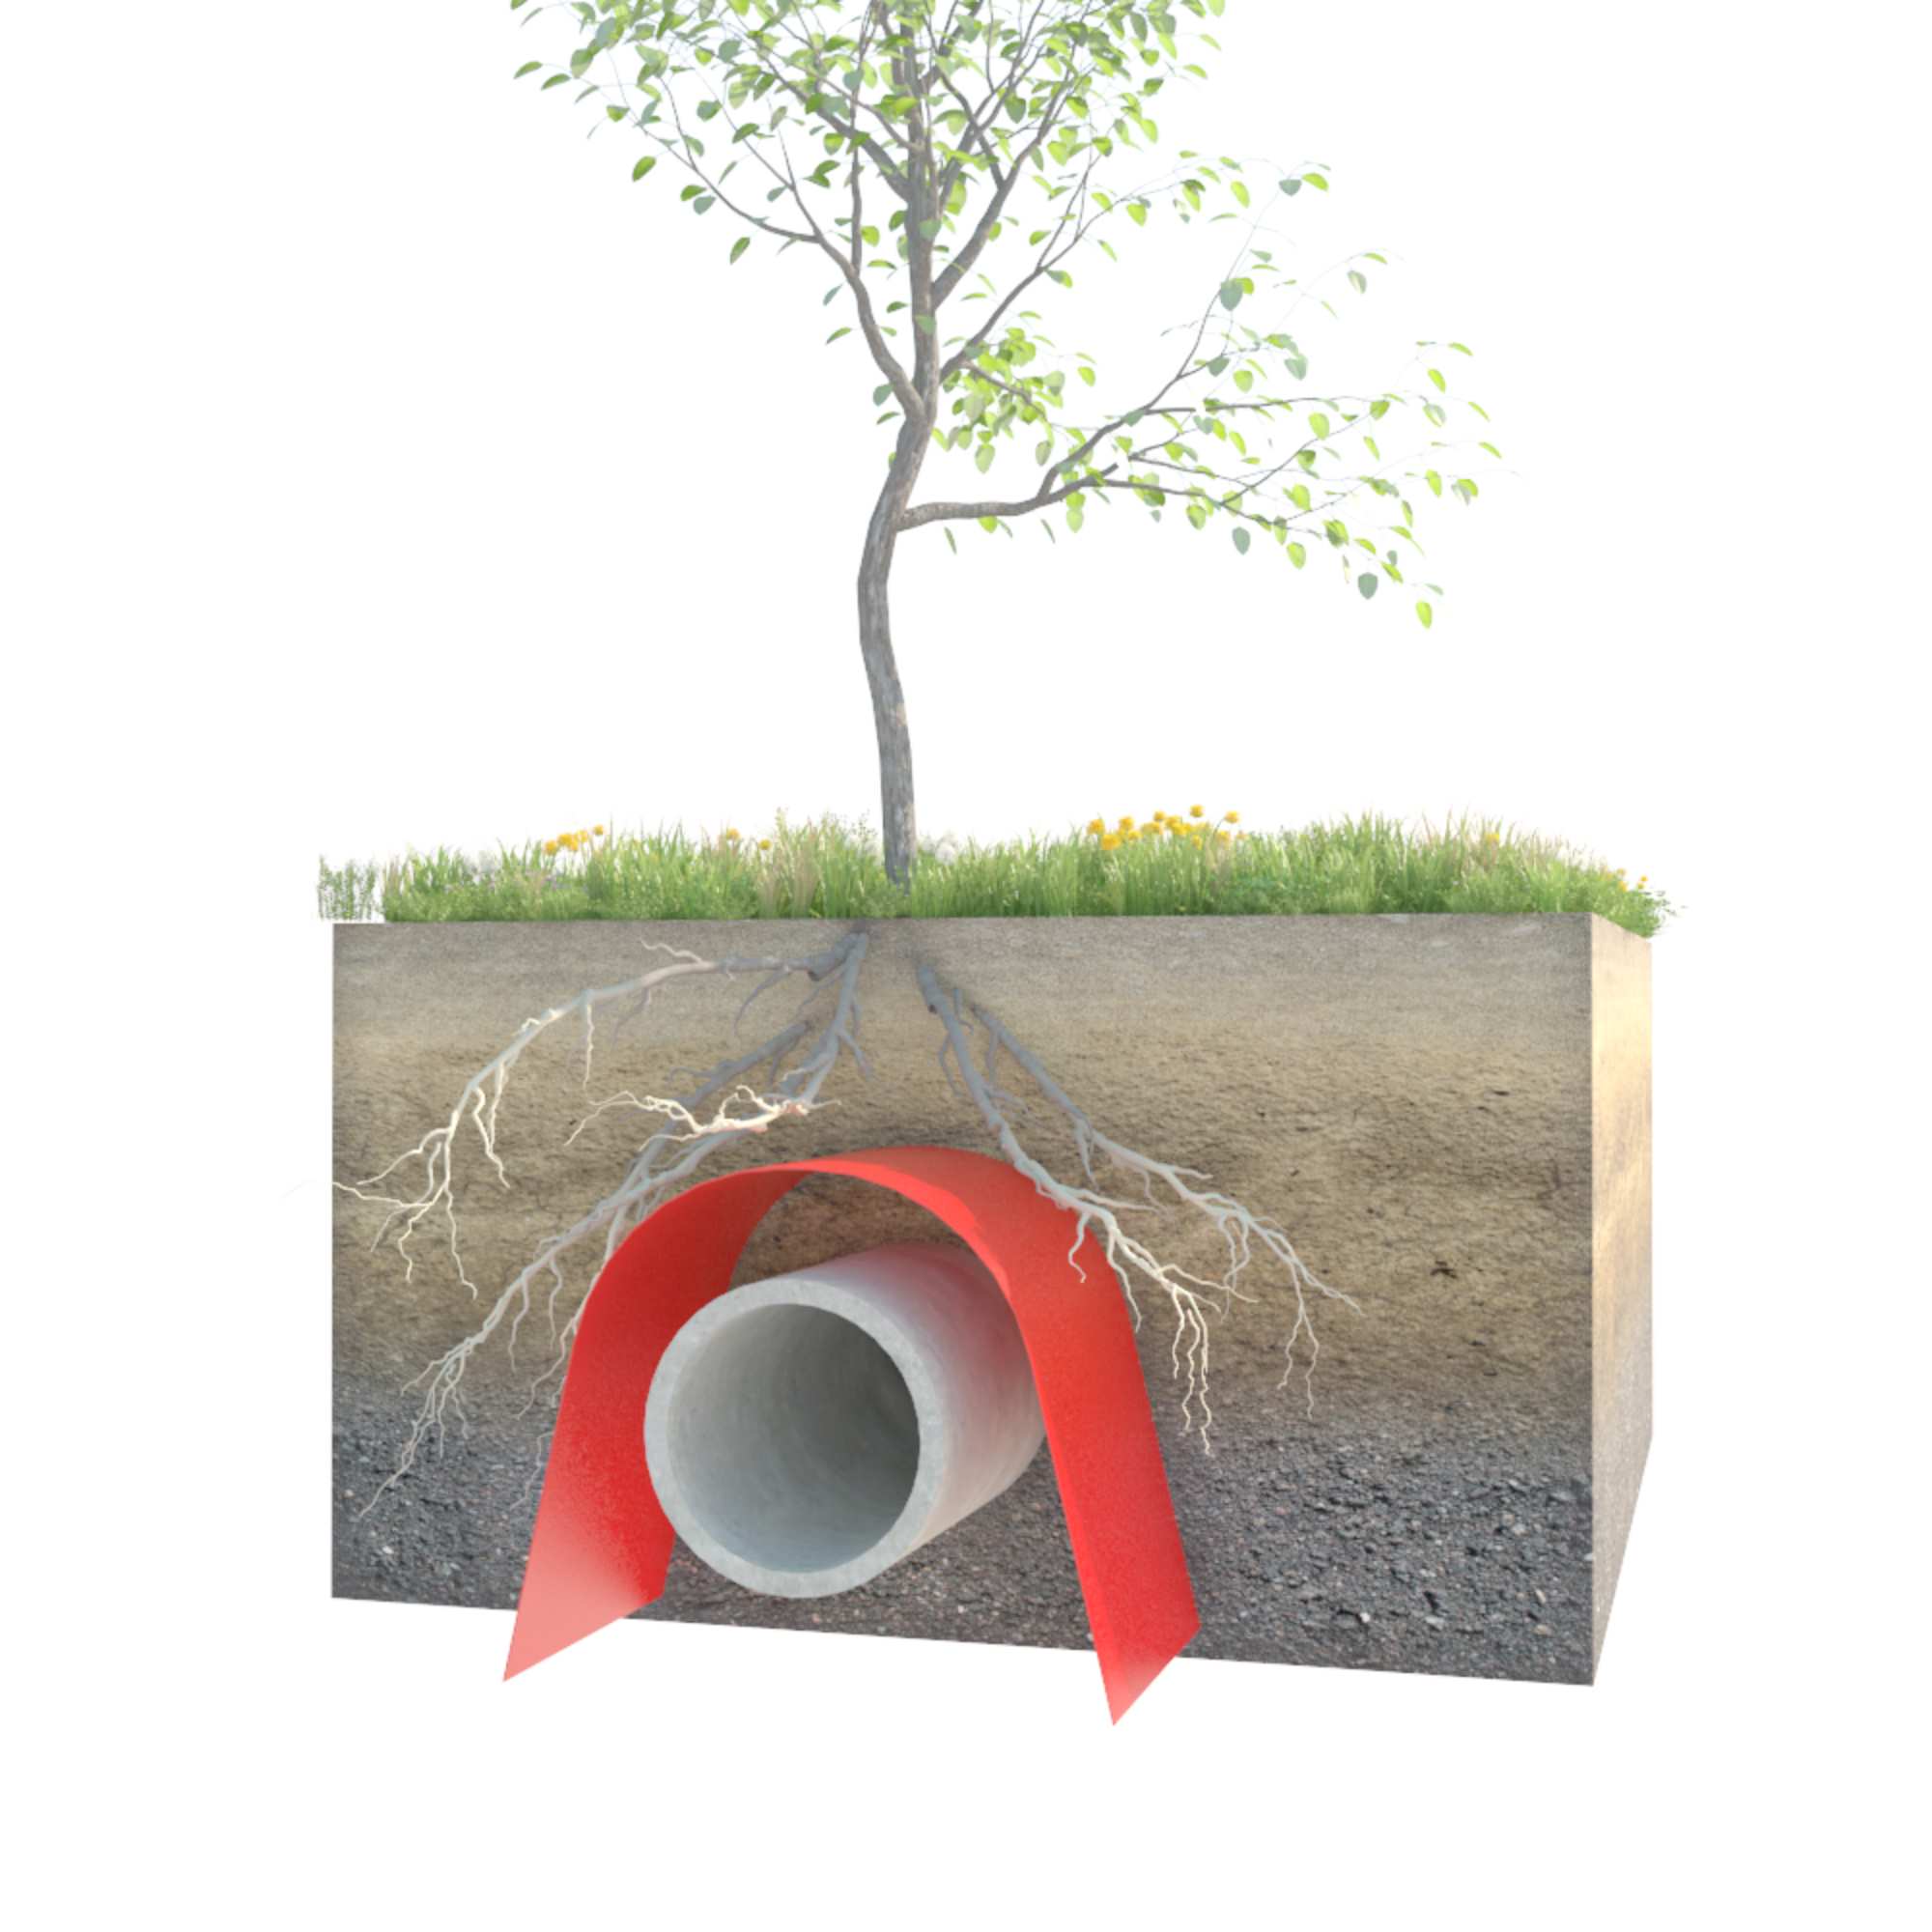 Sympathetic use of Root Barriers in tree planting 